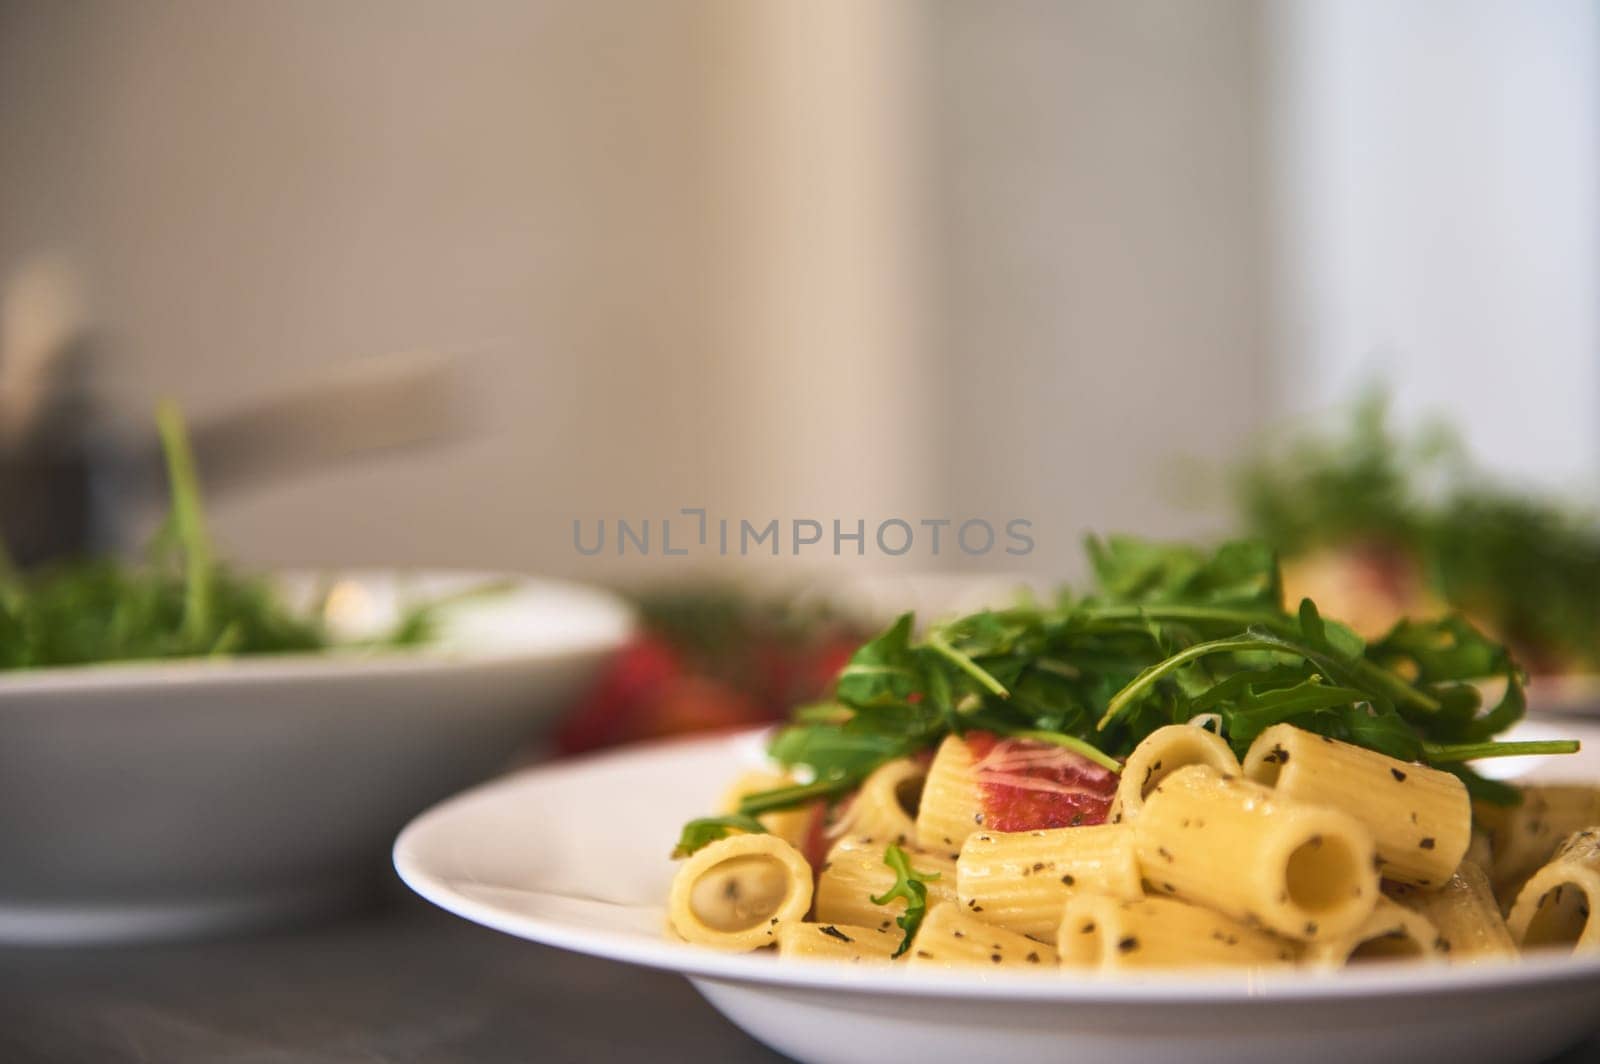 Food background with classic Italian cuisine dish. Pasta penne with tomatoes, arugula leaves and parmesan cheese. Copy advertising space. Classic Italian cuisine dish.